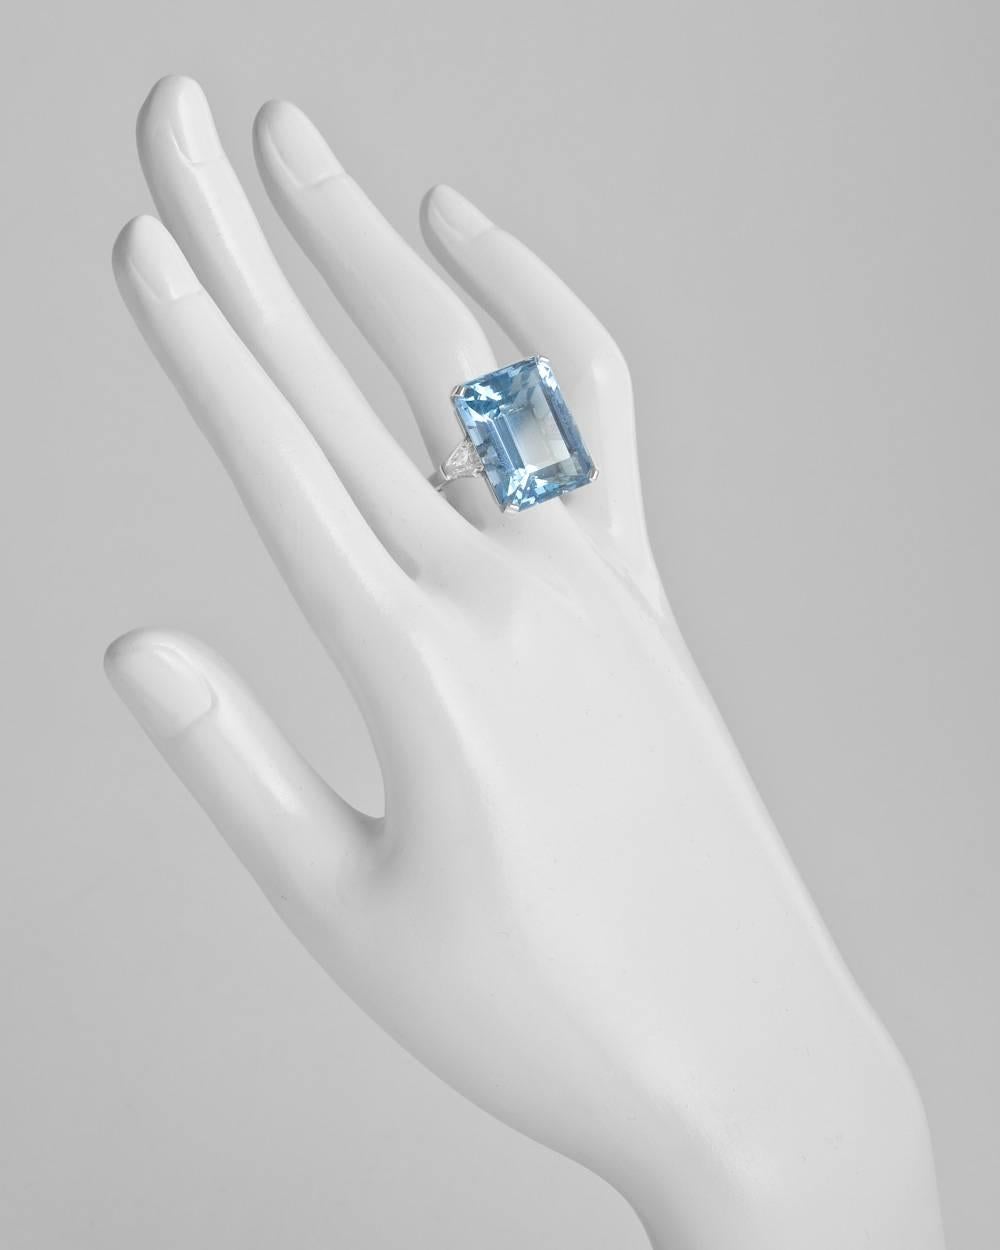 Aquamarine cocktail ring, centering a finely-colored step-cut aquamarine weighing 24.07 carats and measuring approximately 20 x 16mm, flanked by a pair of colorless shield-cut diamond shoulders weighing 1.52 total carats (both F-color), mounted in